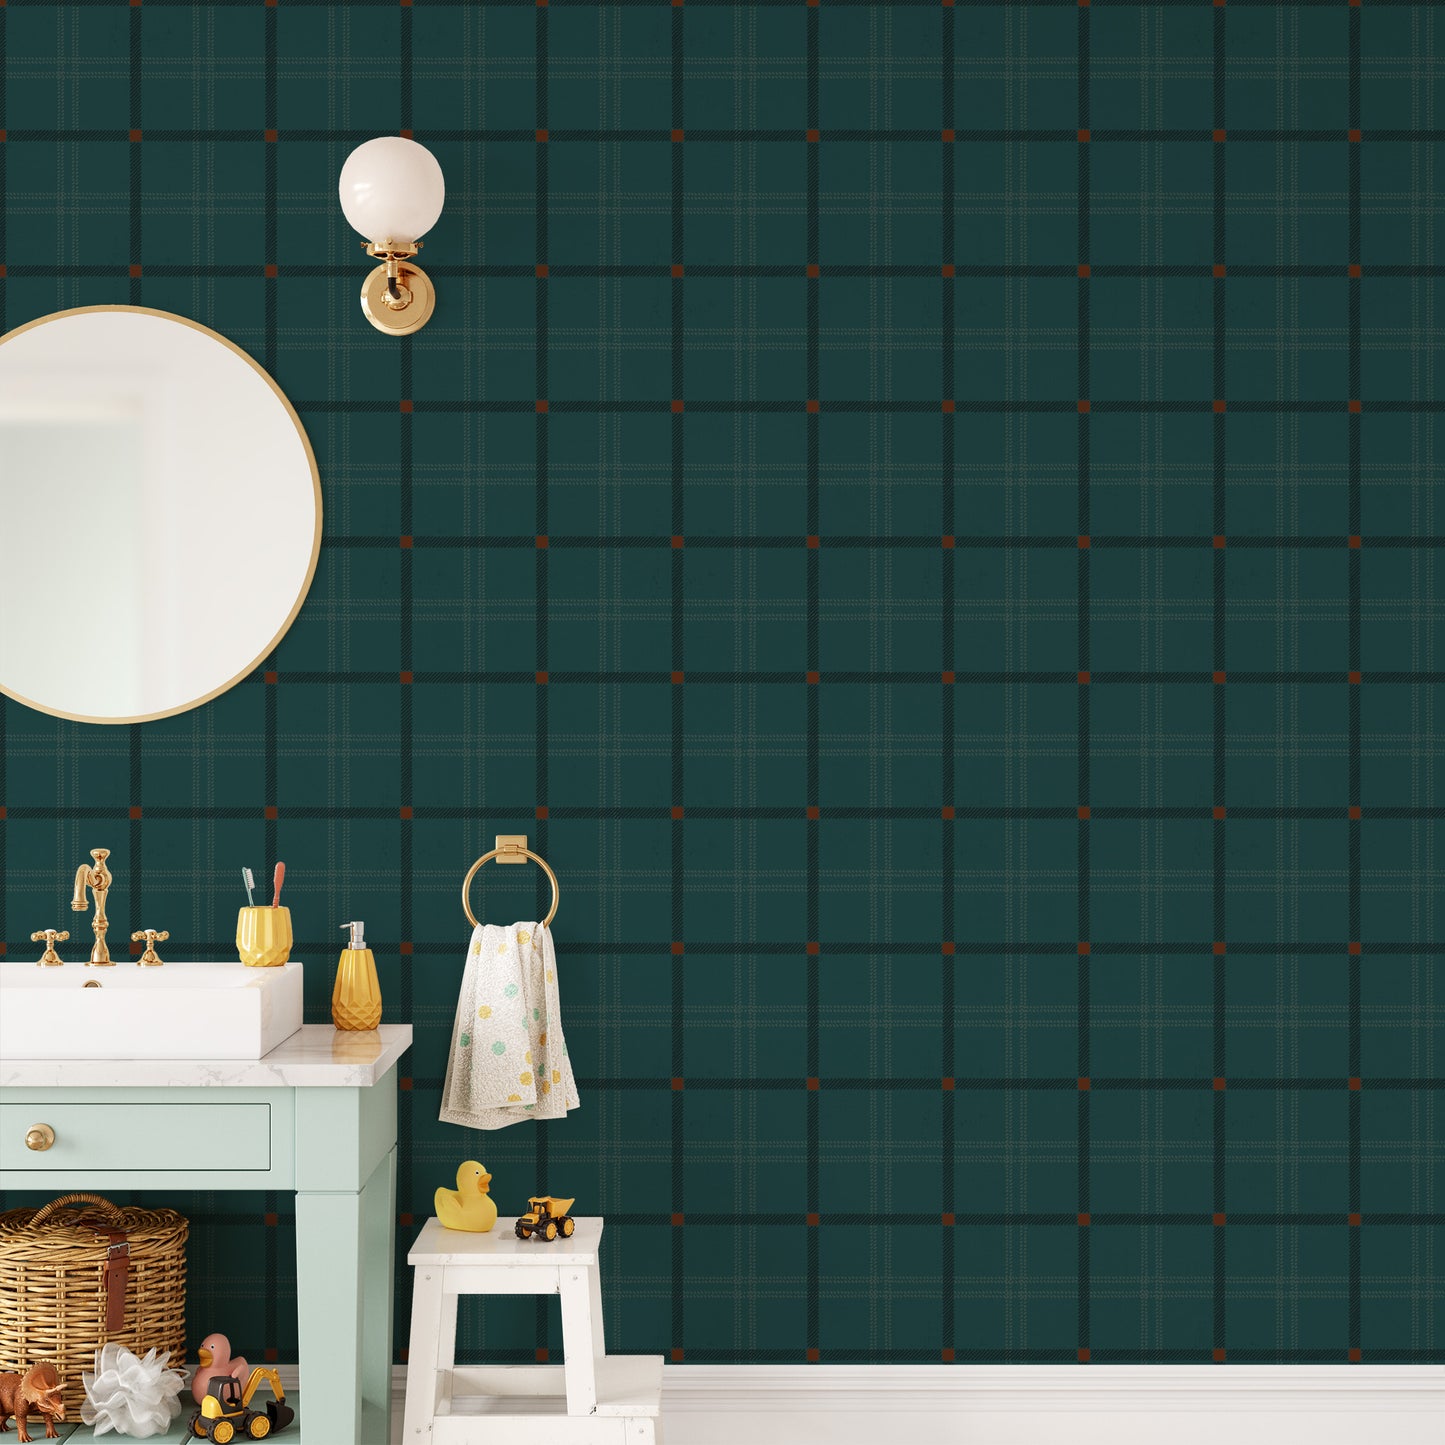 Bathroom featuring Cayla Naylor Anchorage- Seaworthy Peel and Stick Wallpaper - a plaid pattern